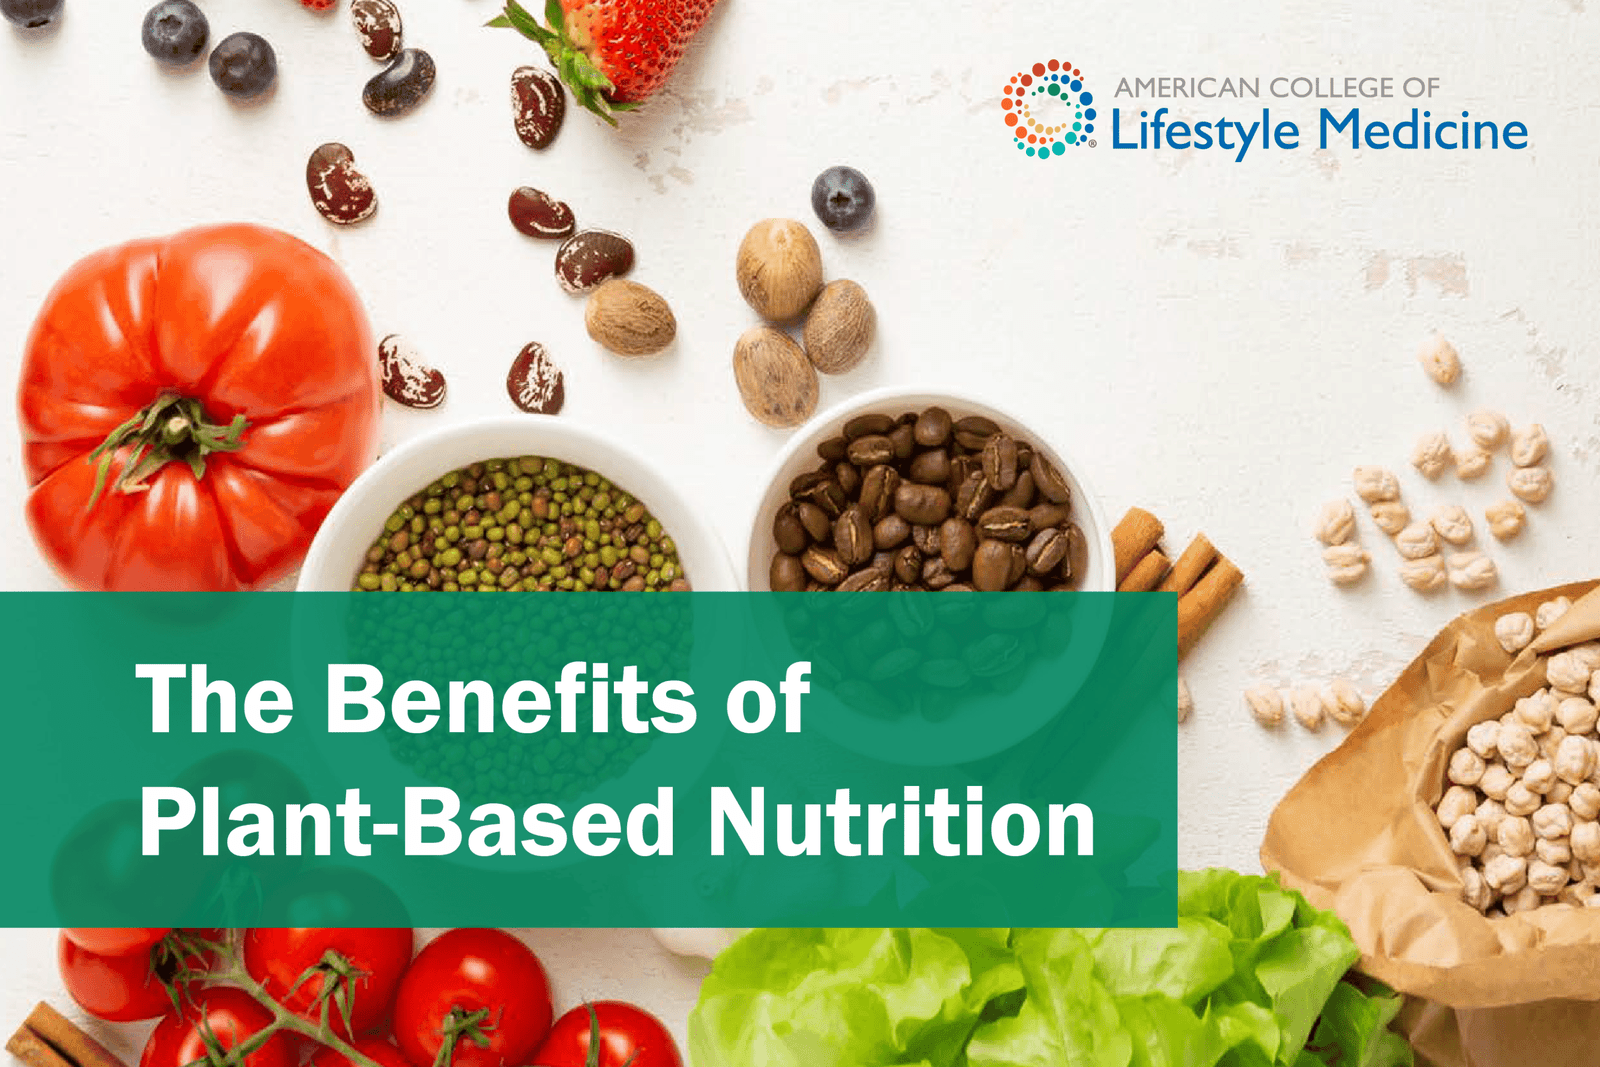 The Benefits Of Plant-Based Nutrition For Health And Well-Being